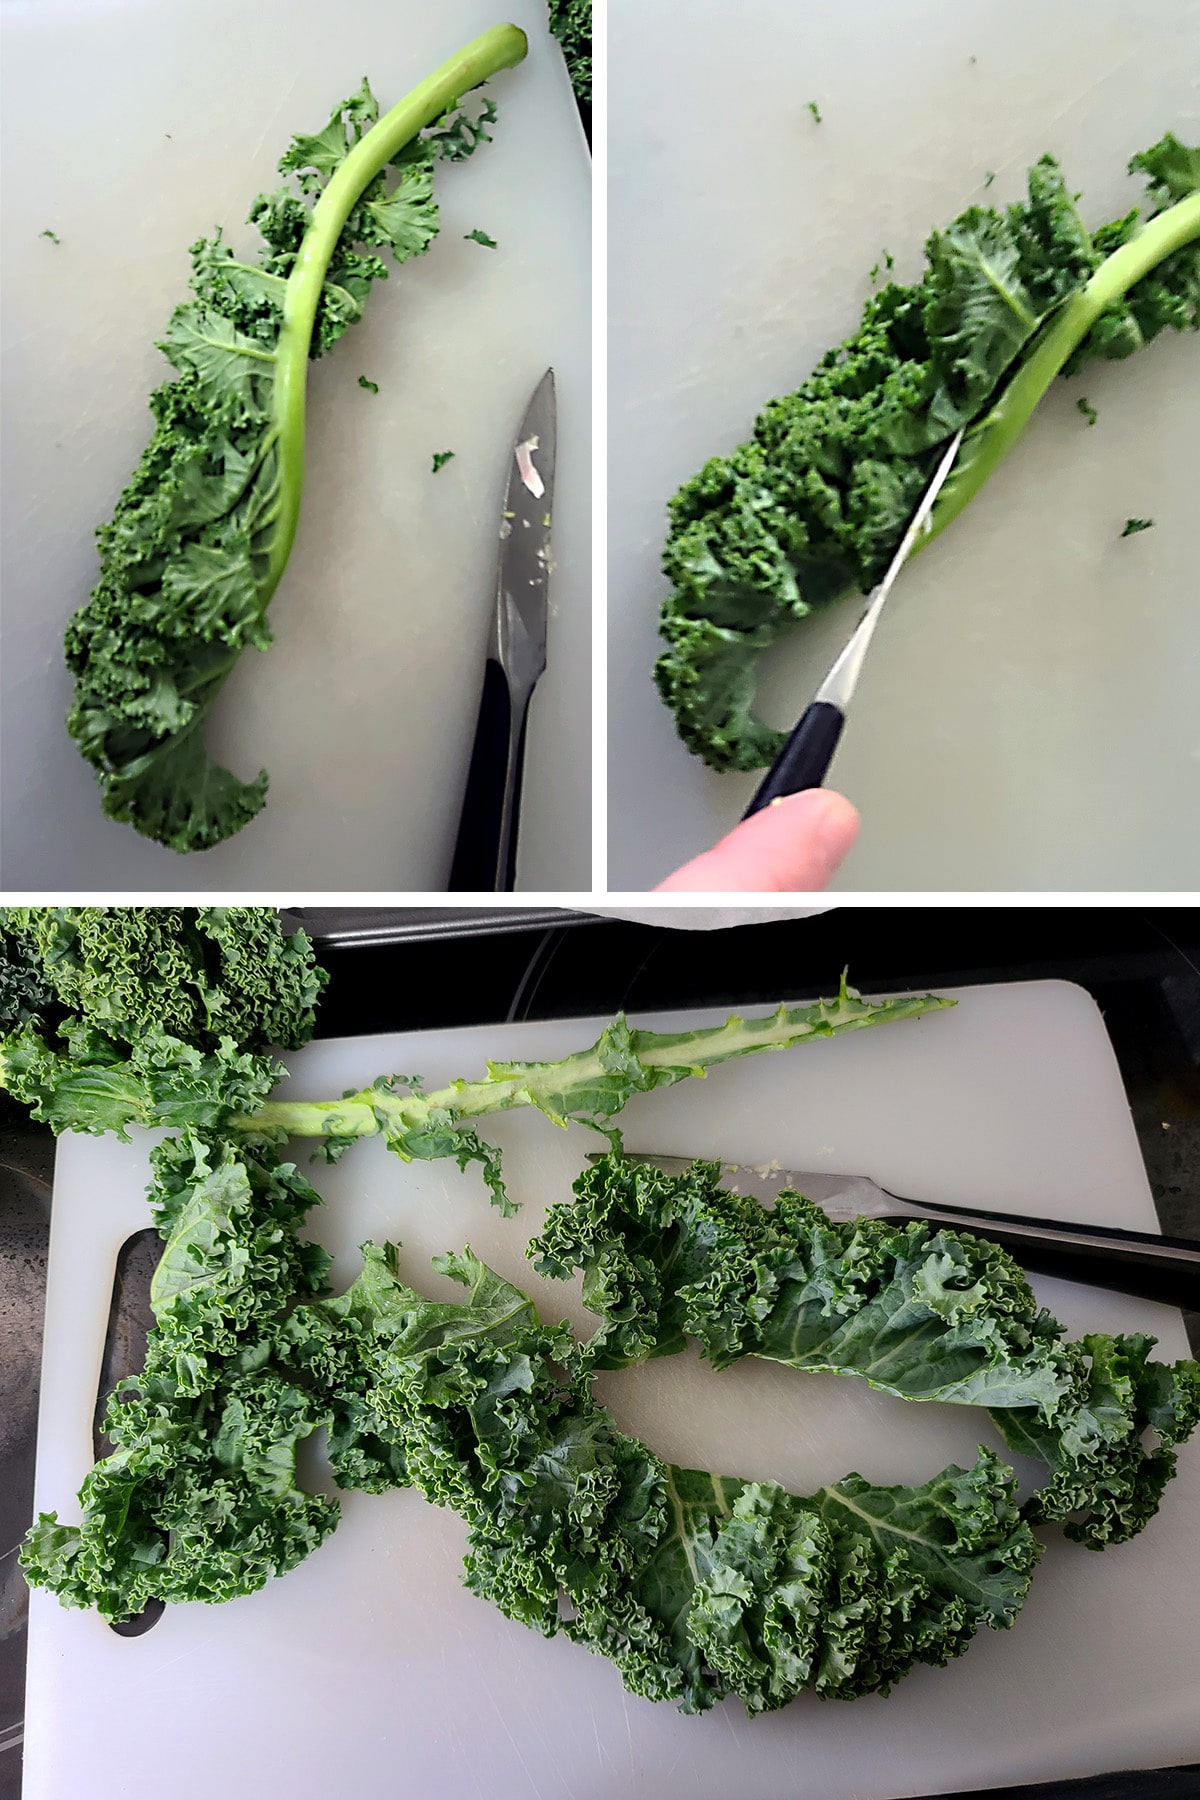 A 3 part image showing a leaf of curly kale being trimmed.